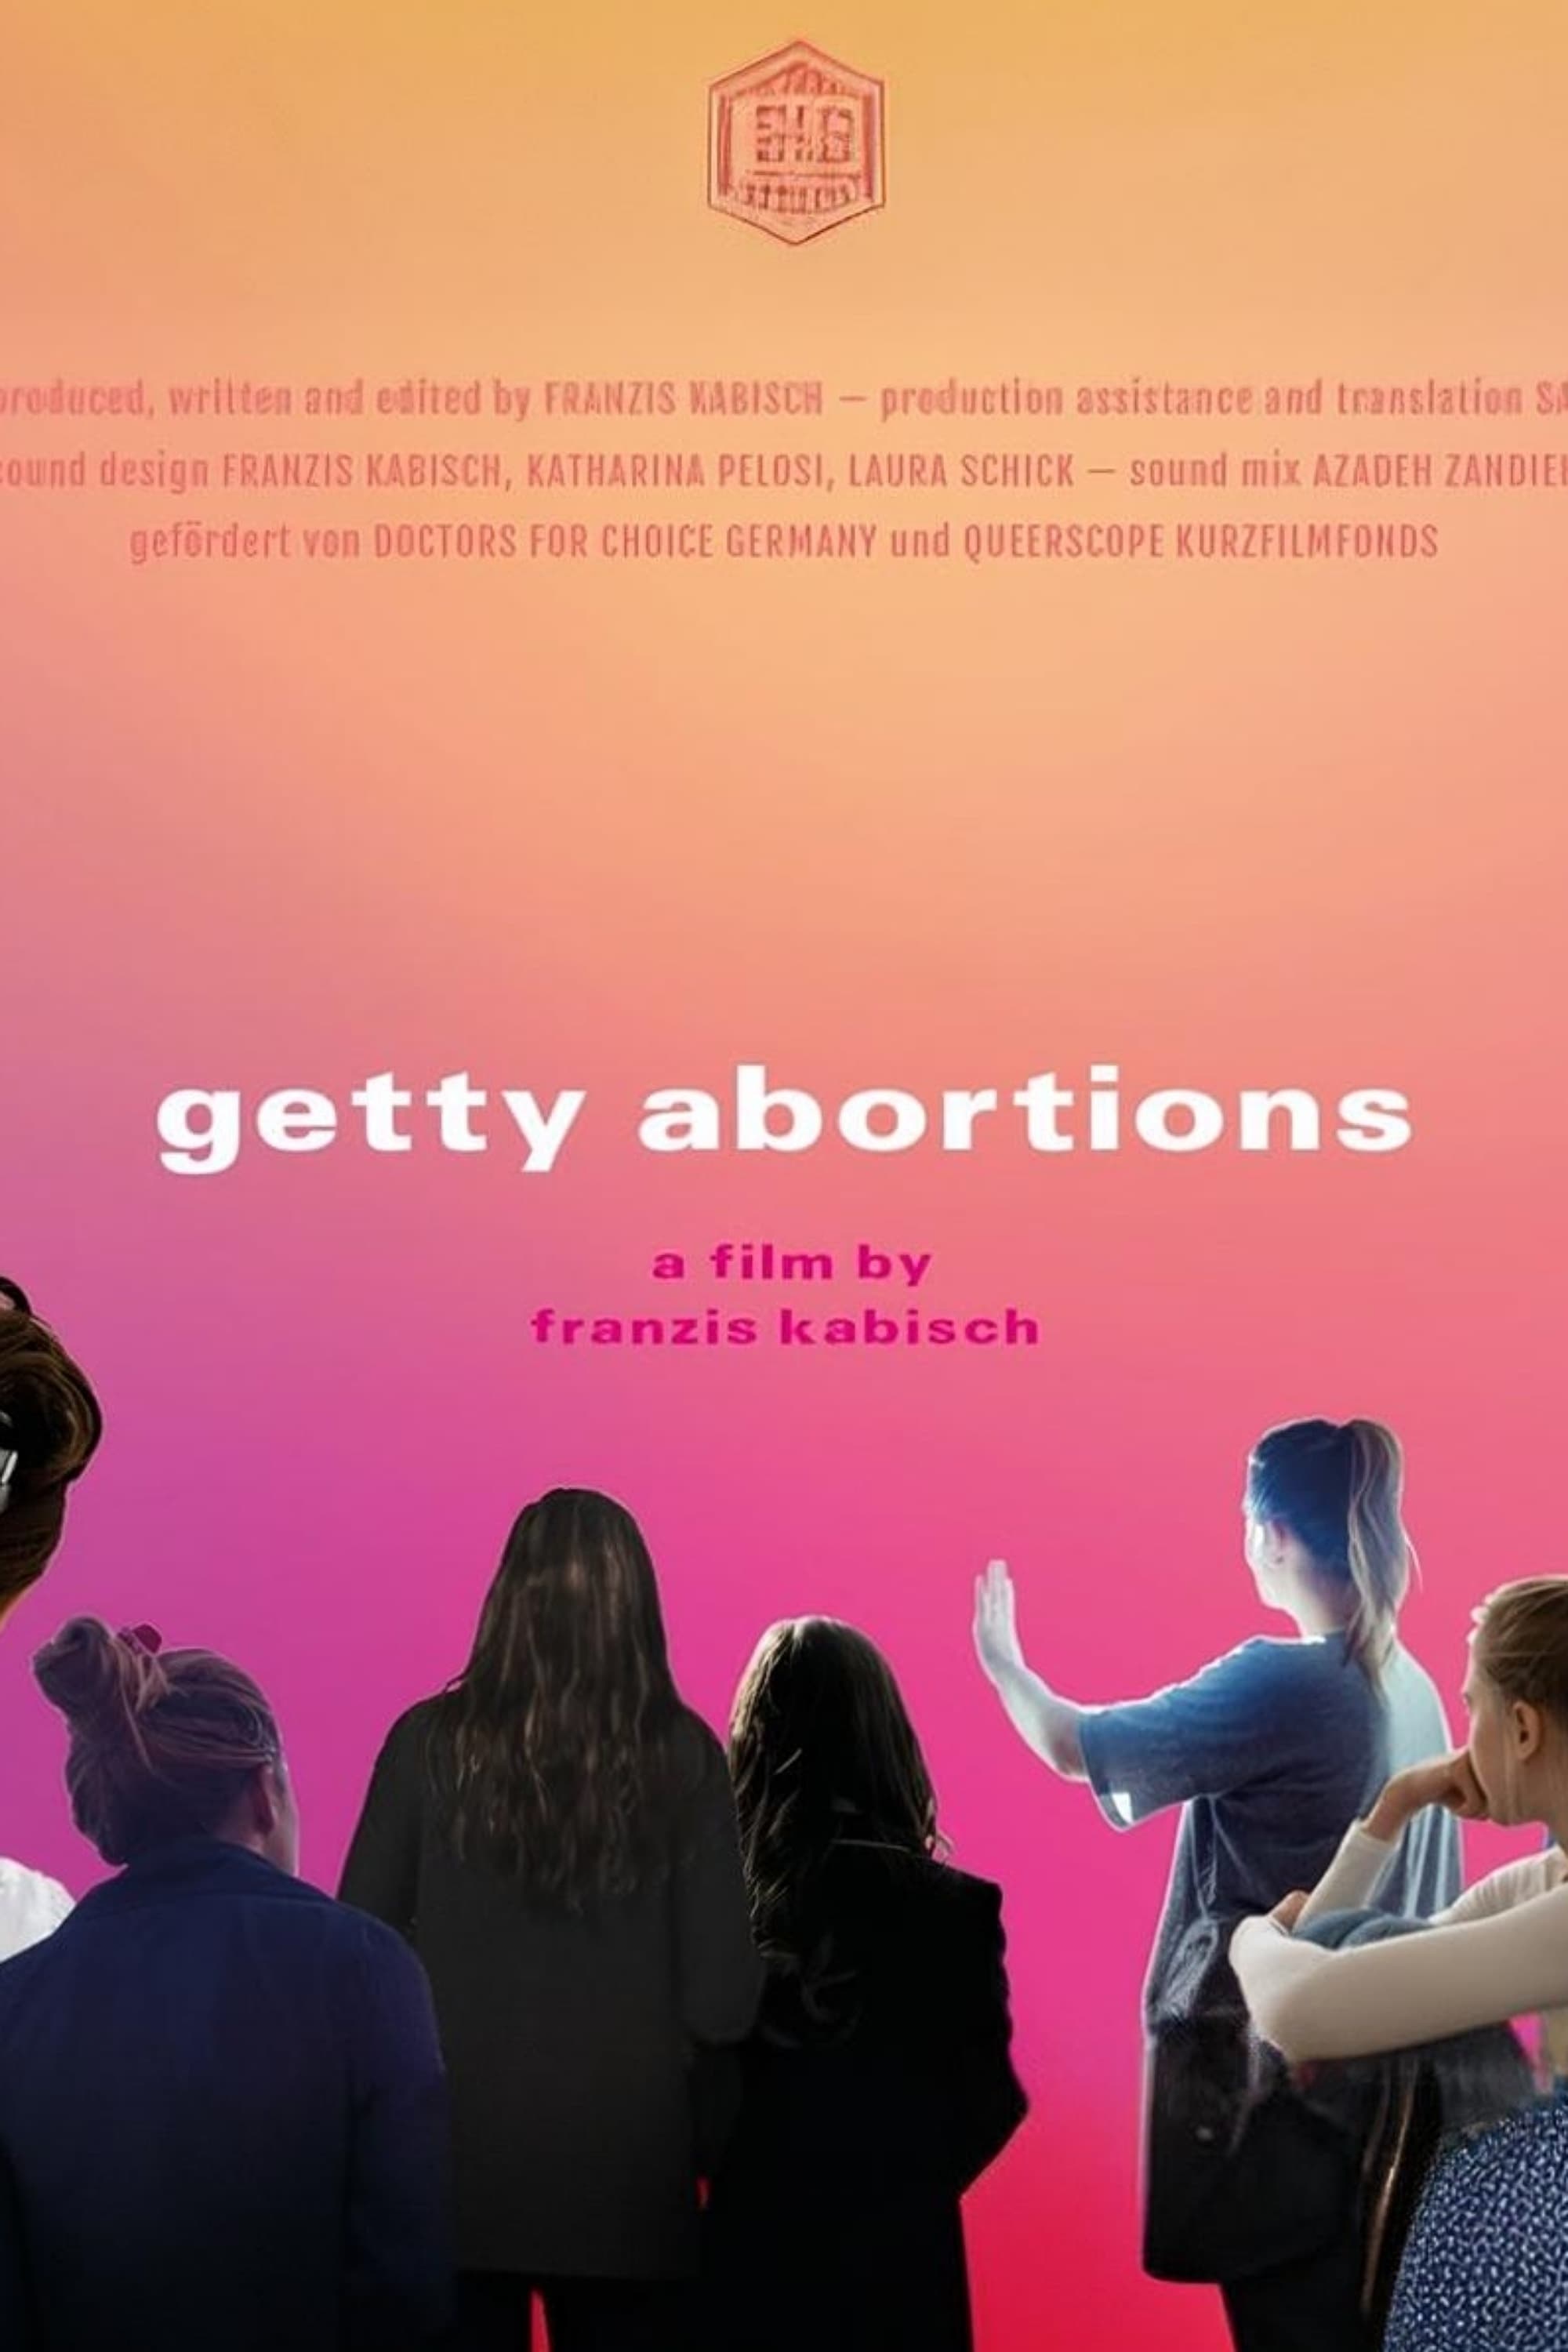 getty abortions